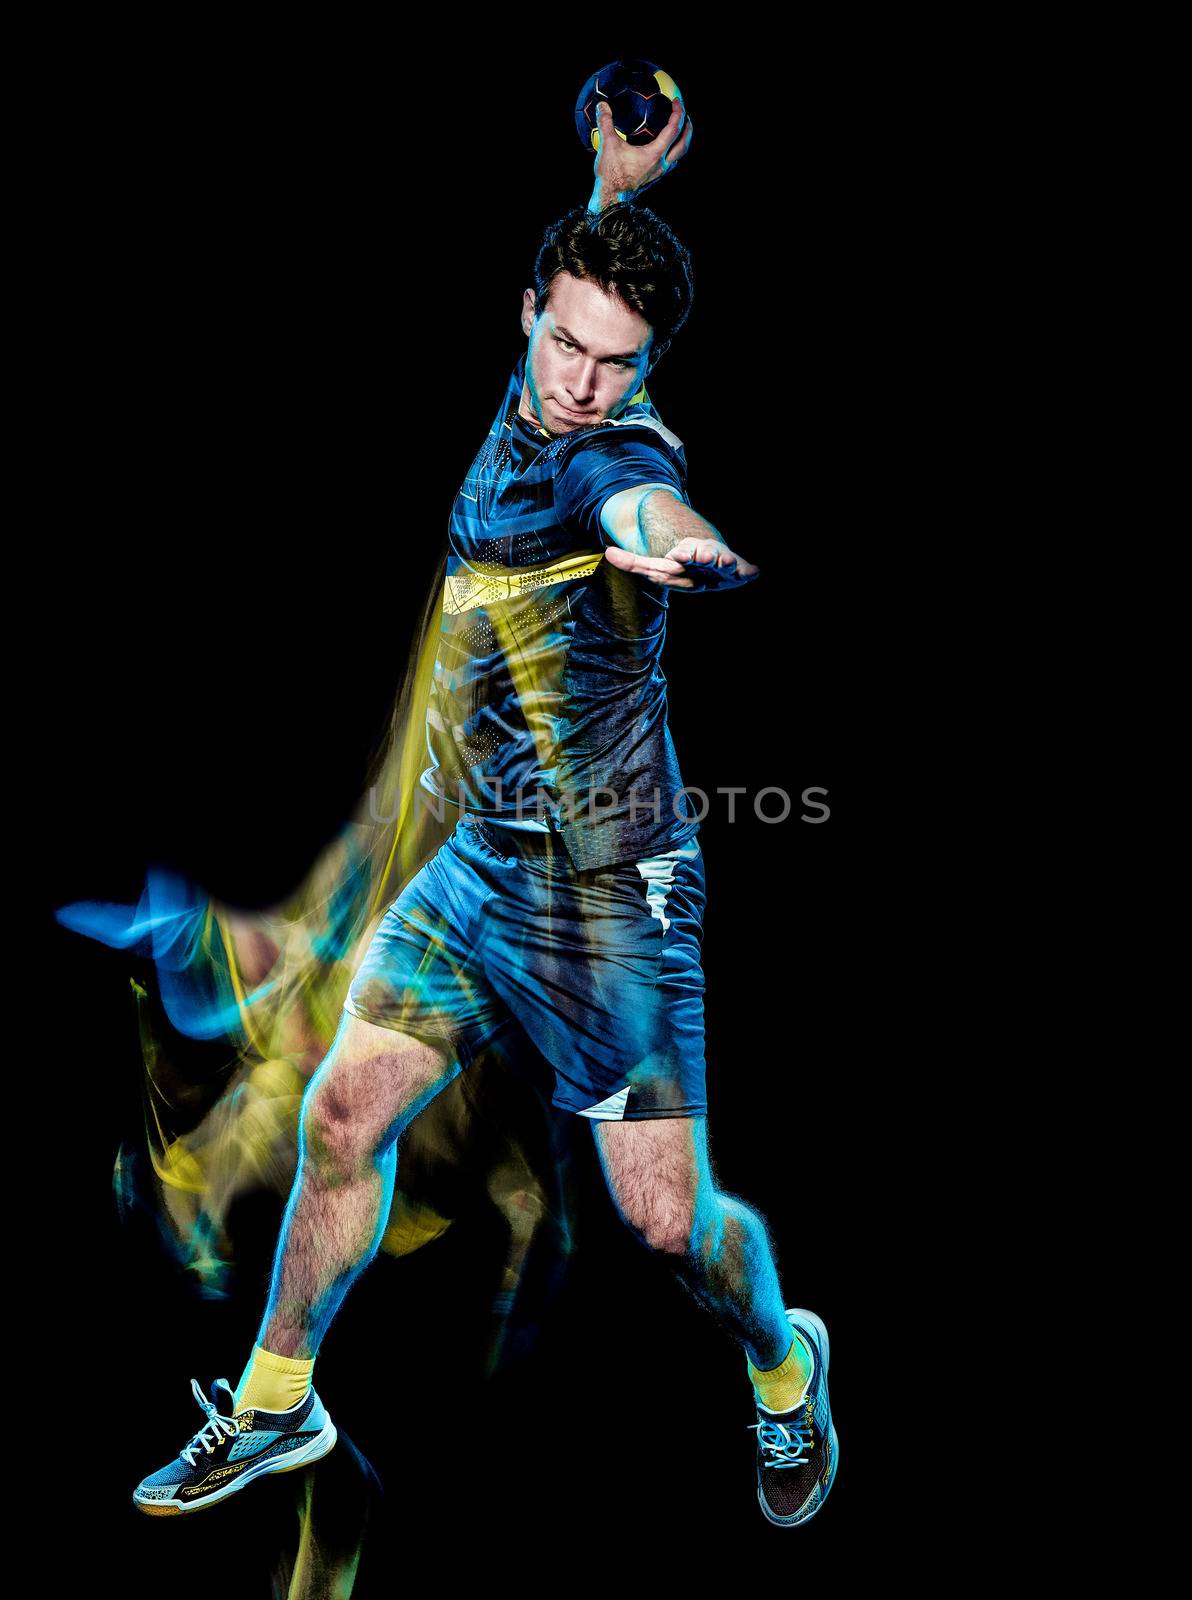 one caucasian handball player young man isolated on black background with speed light painting effect motion blur